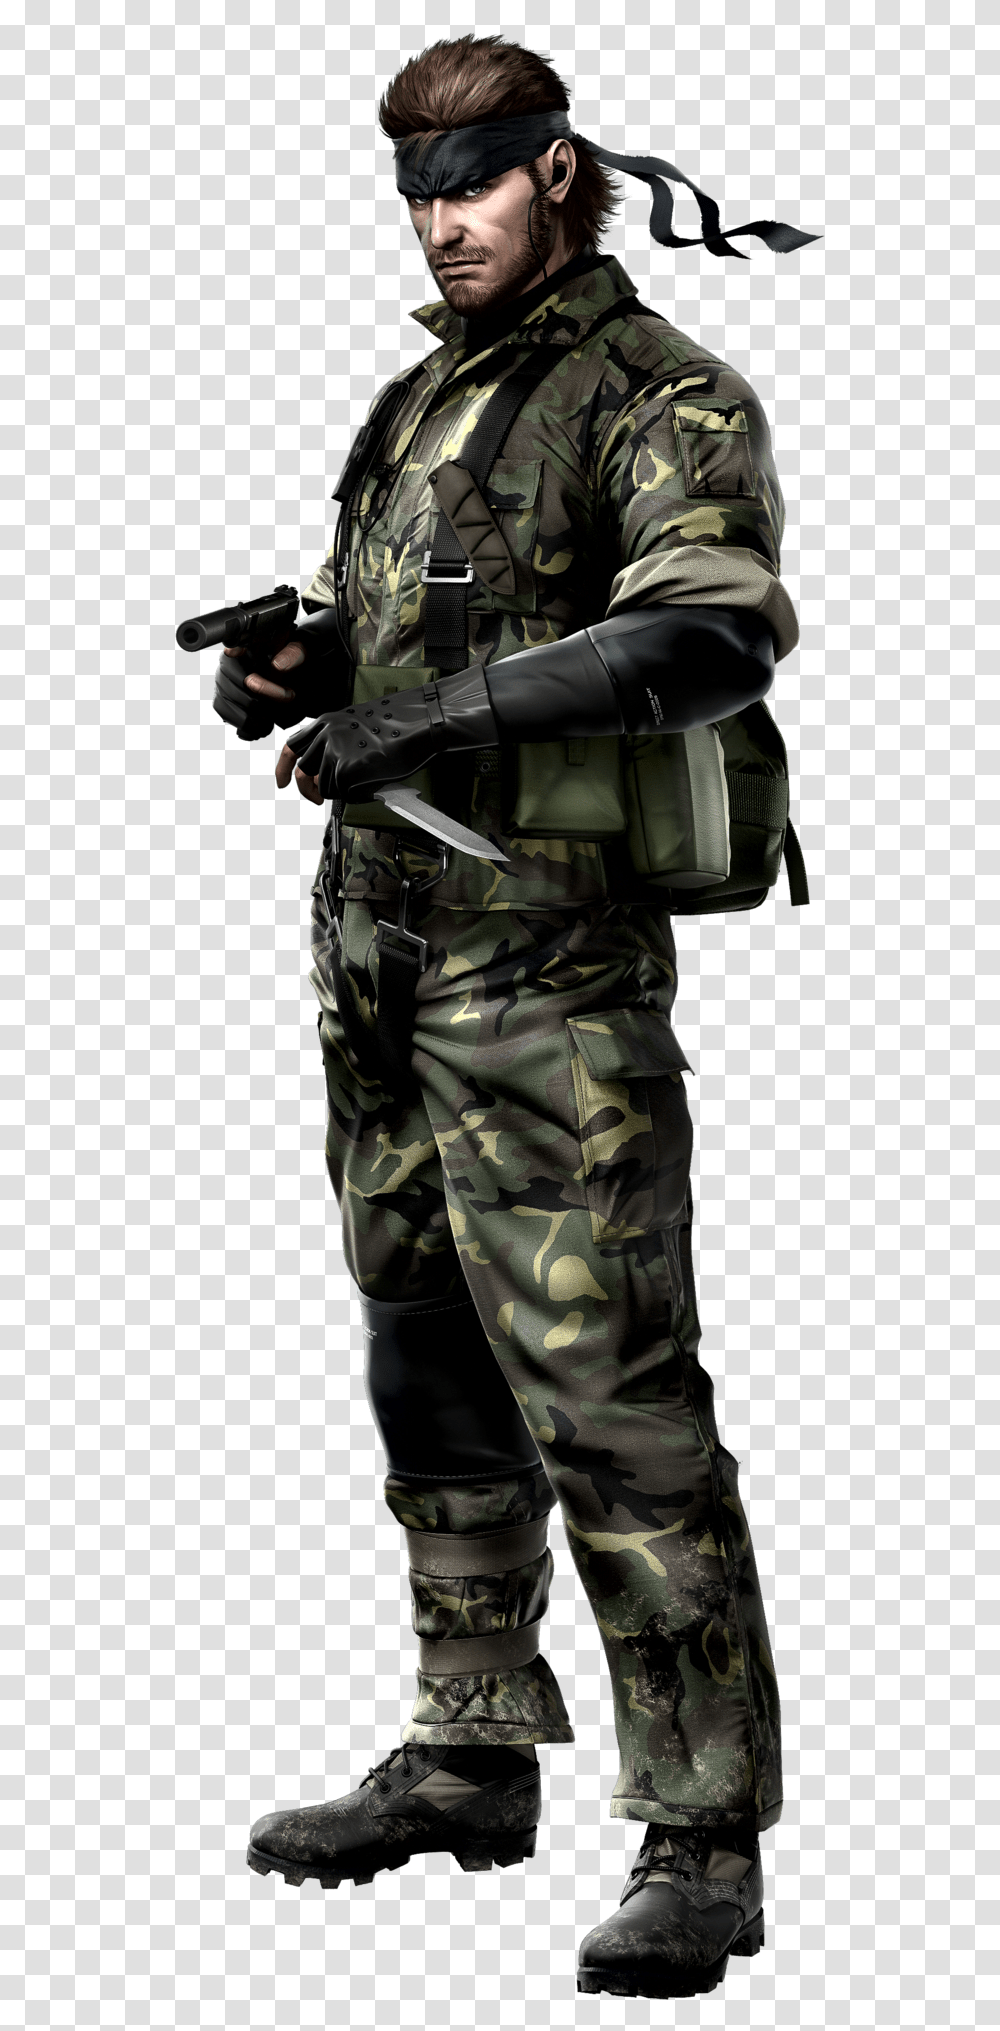 Metal Gear Solid 3 Snake Eater Metal Gear Solid 3 Snake Eater Snake, Military, Military Uniform, Person, Human Transparent Png